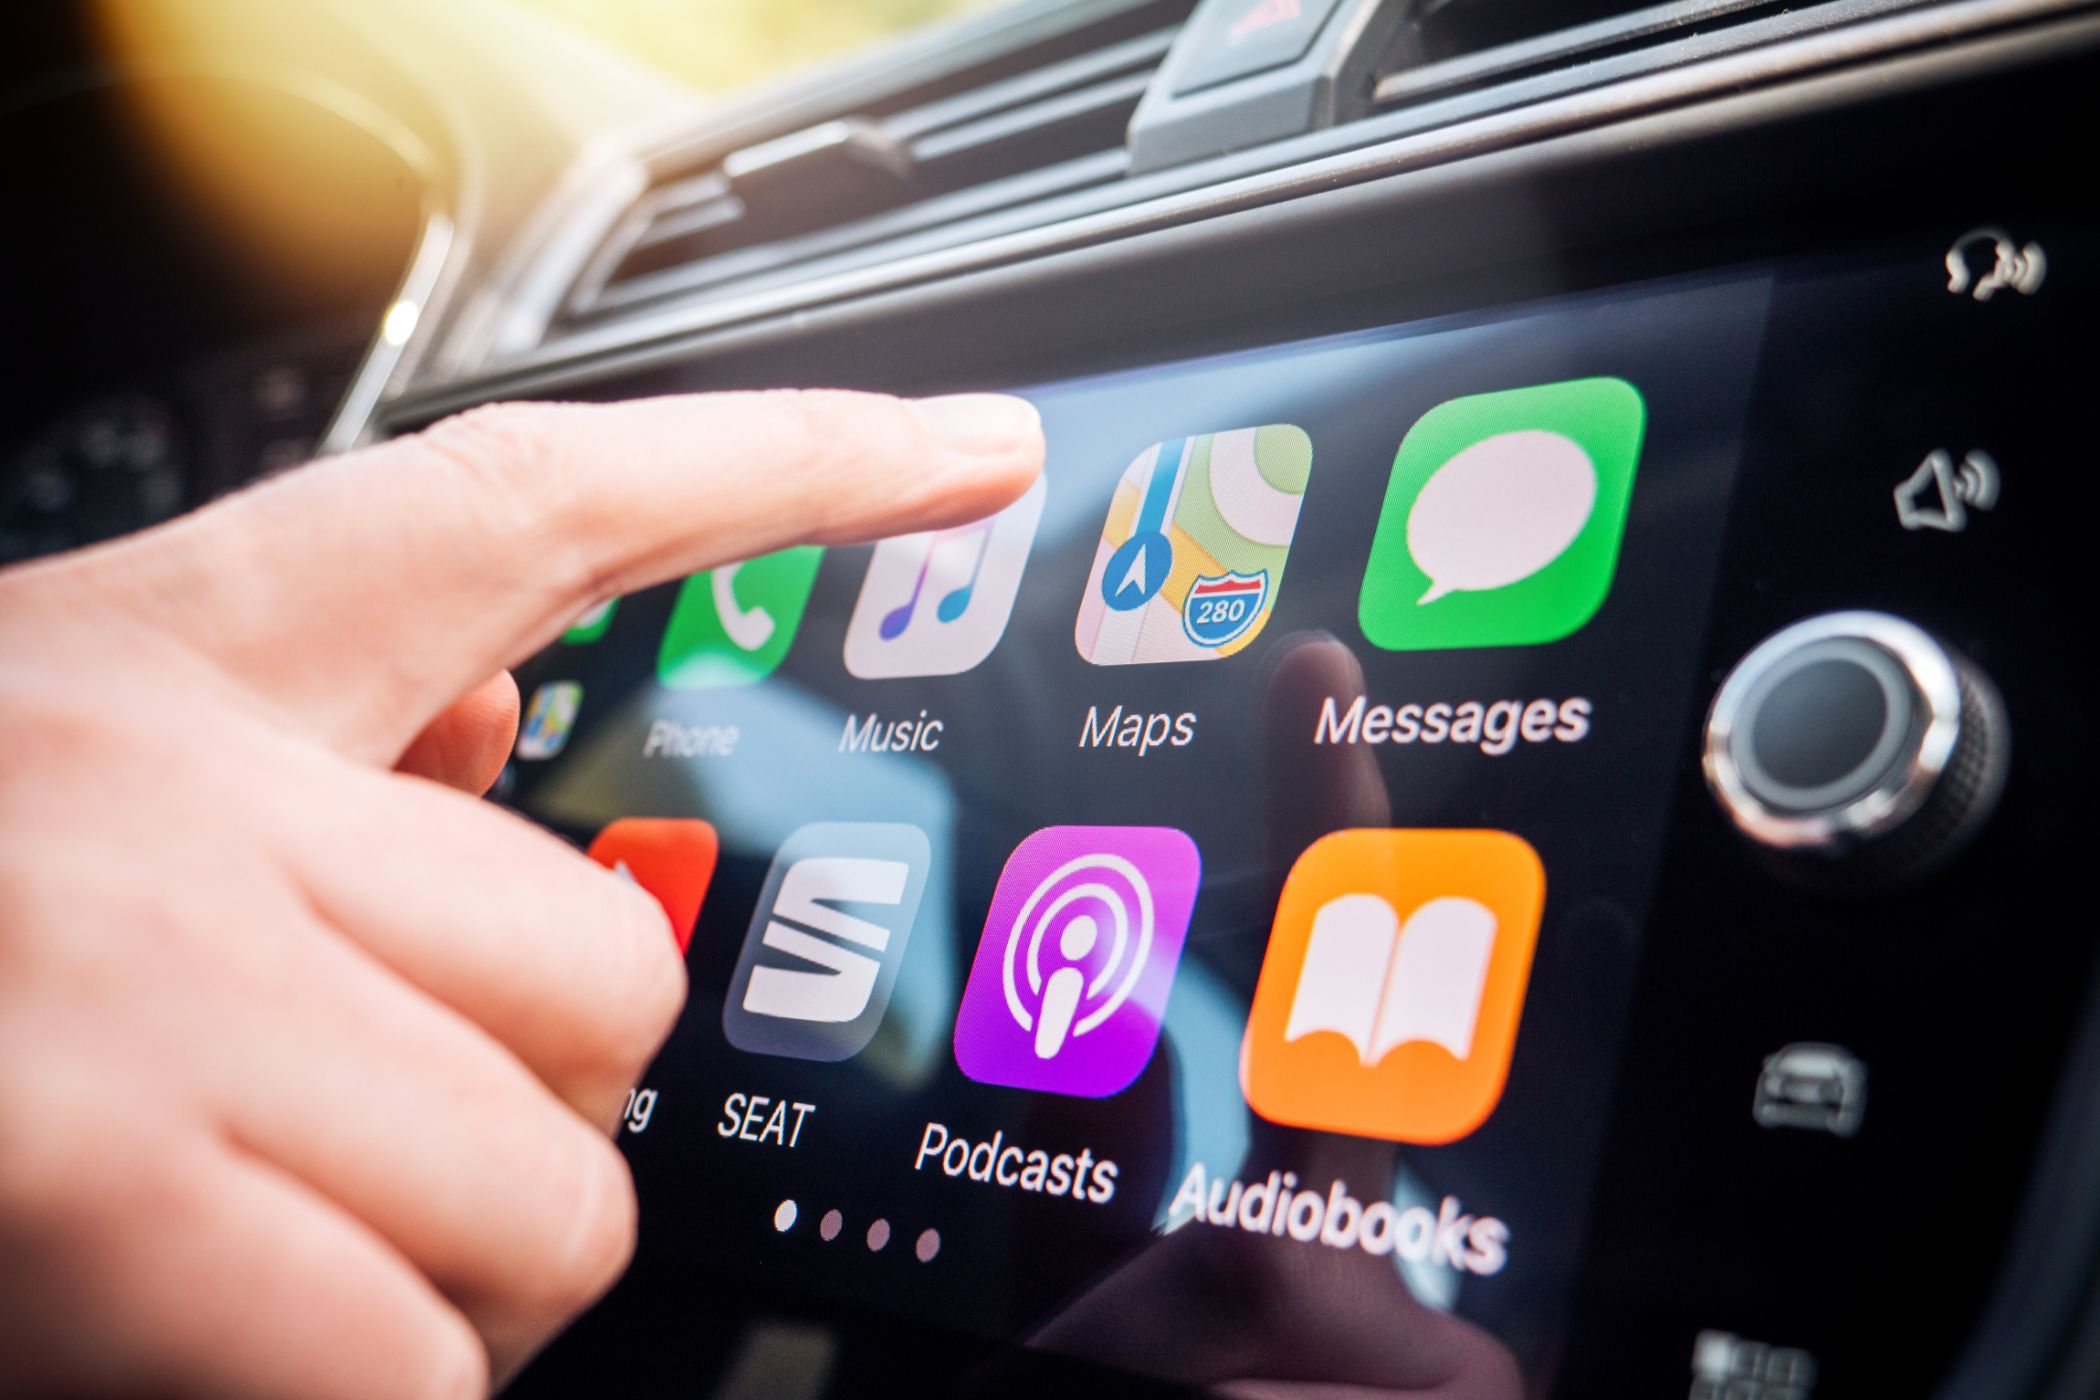 Using Apple CarPlay with a car's entertainment unit.